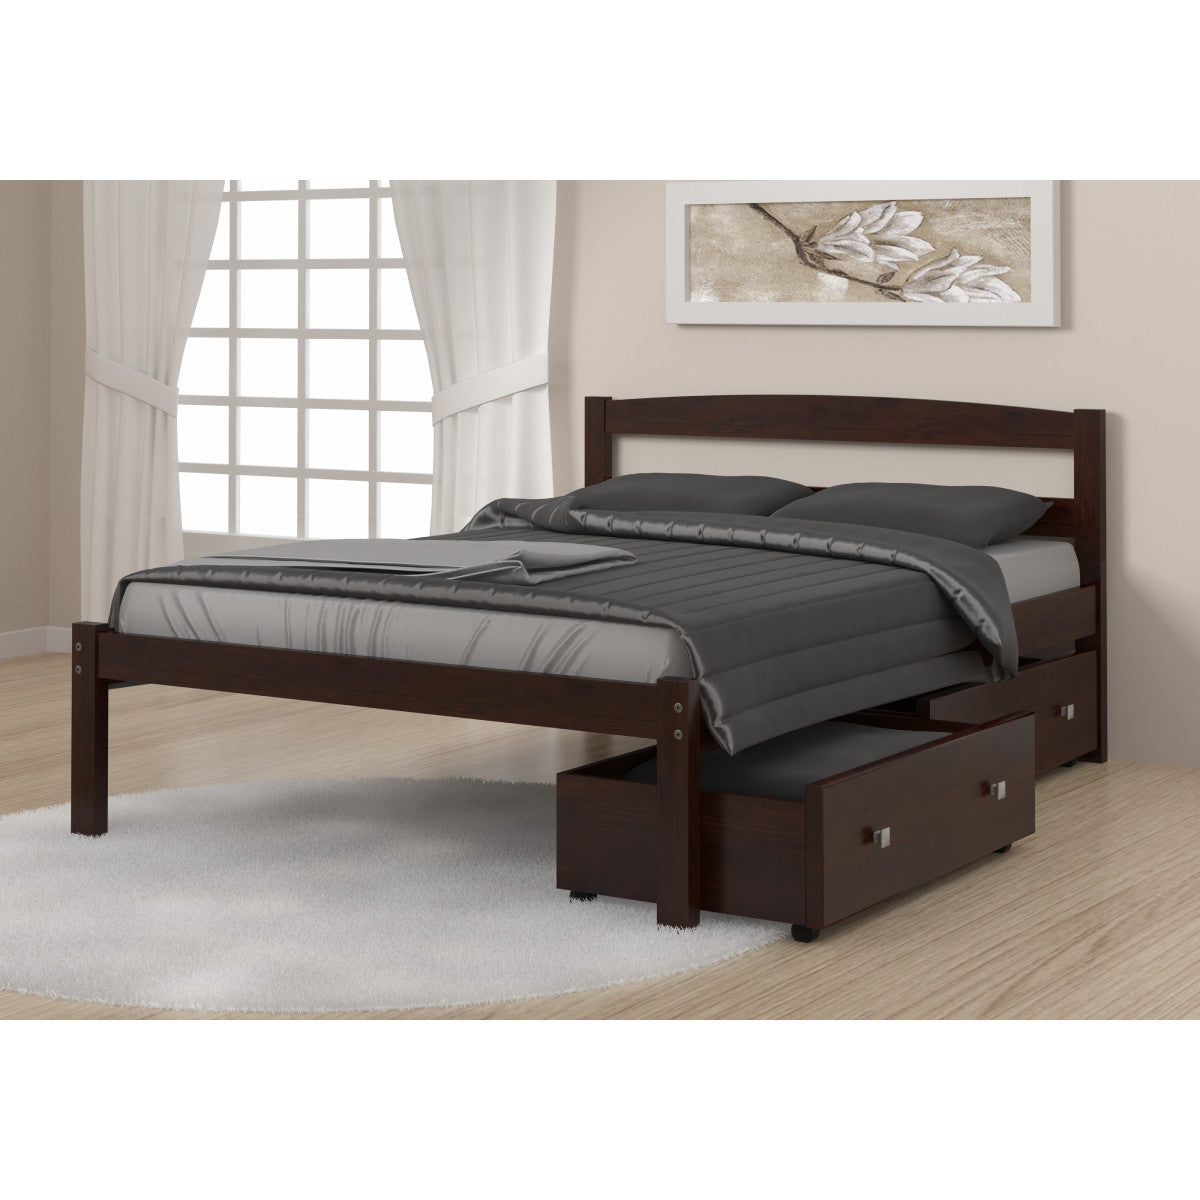 FULL ECONO BED WITH DUAL UNDER BED DRAWERS DARK CAPPUCCINO FINISH